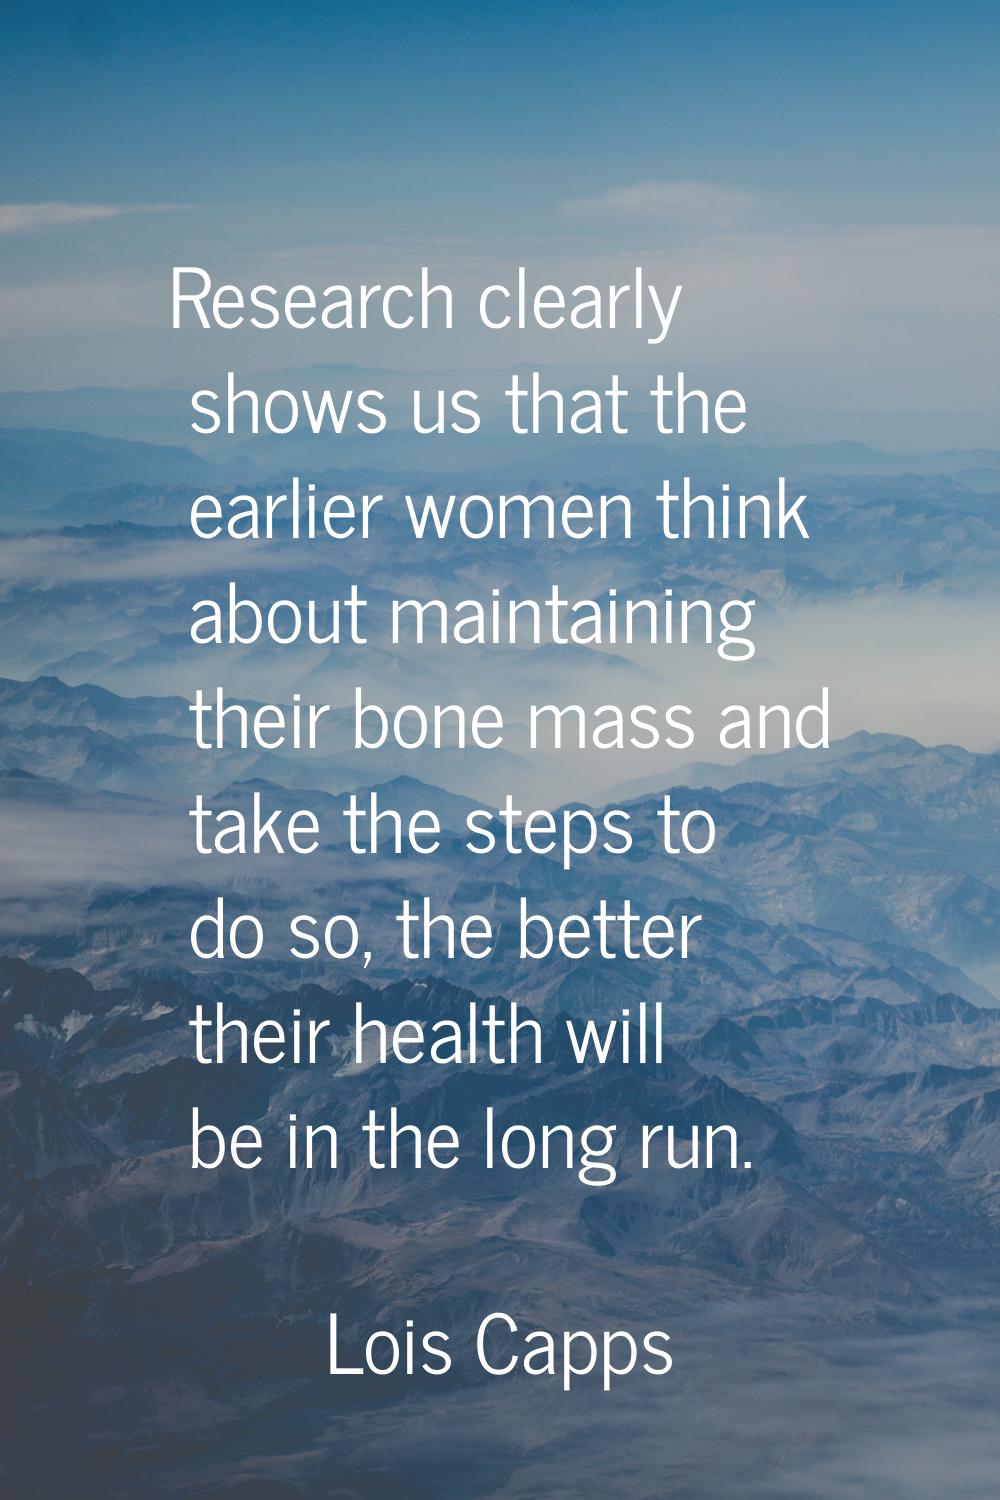 Research clearly shows us that the earlier women think about maintaining their bone mass and take t